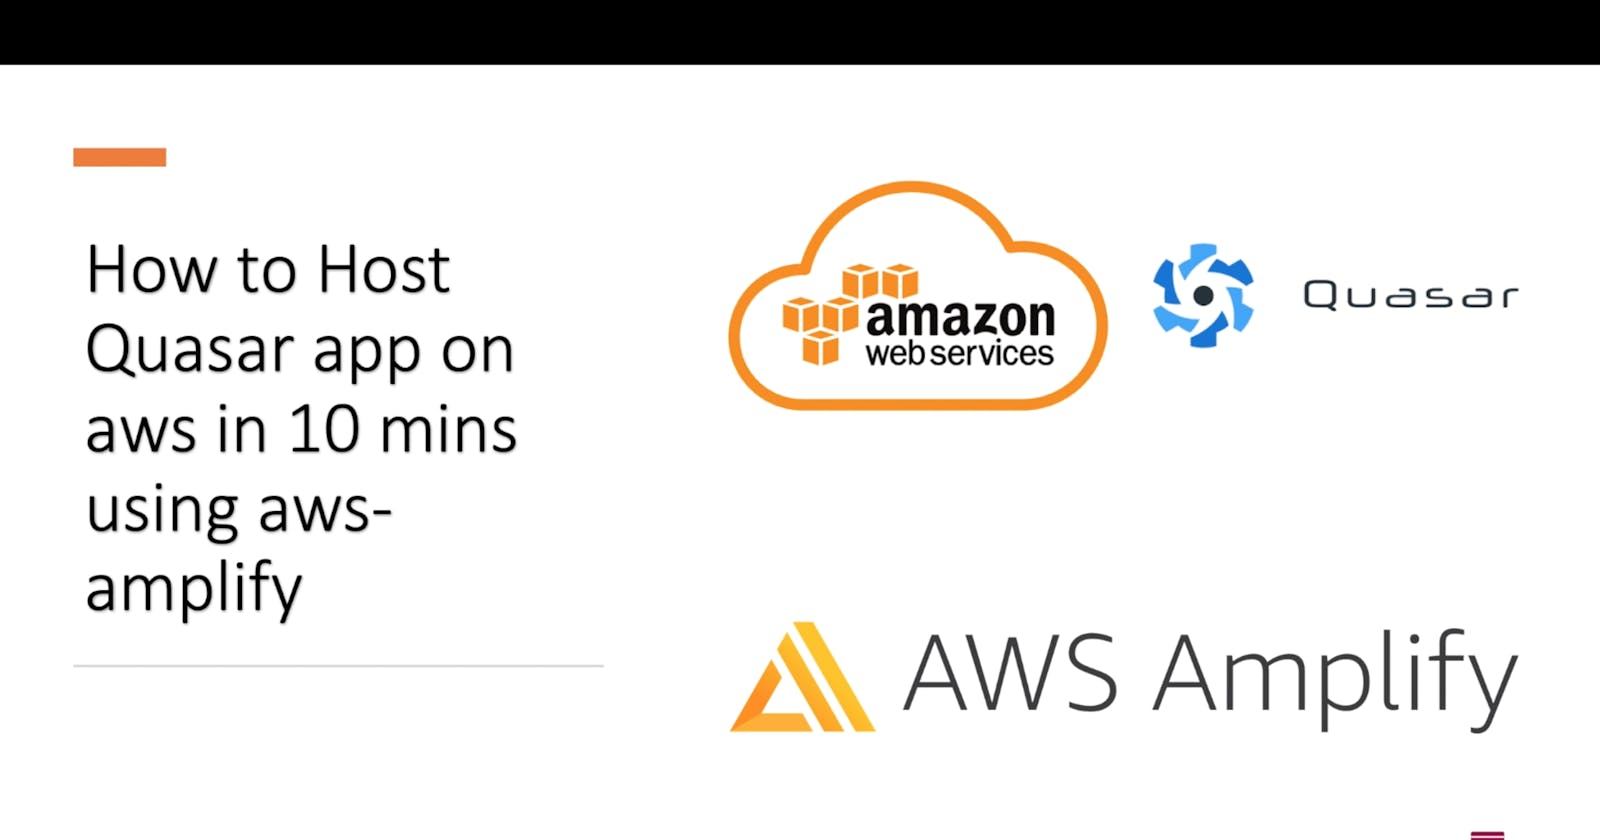 How to Host Quasar application on aws in 10 mins using aws-amplify